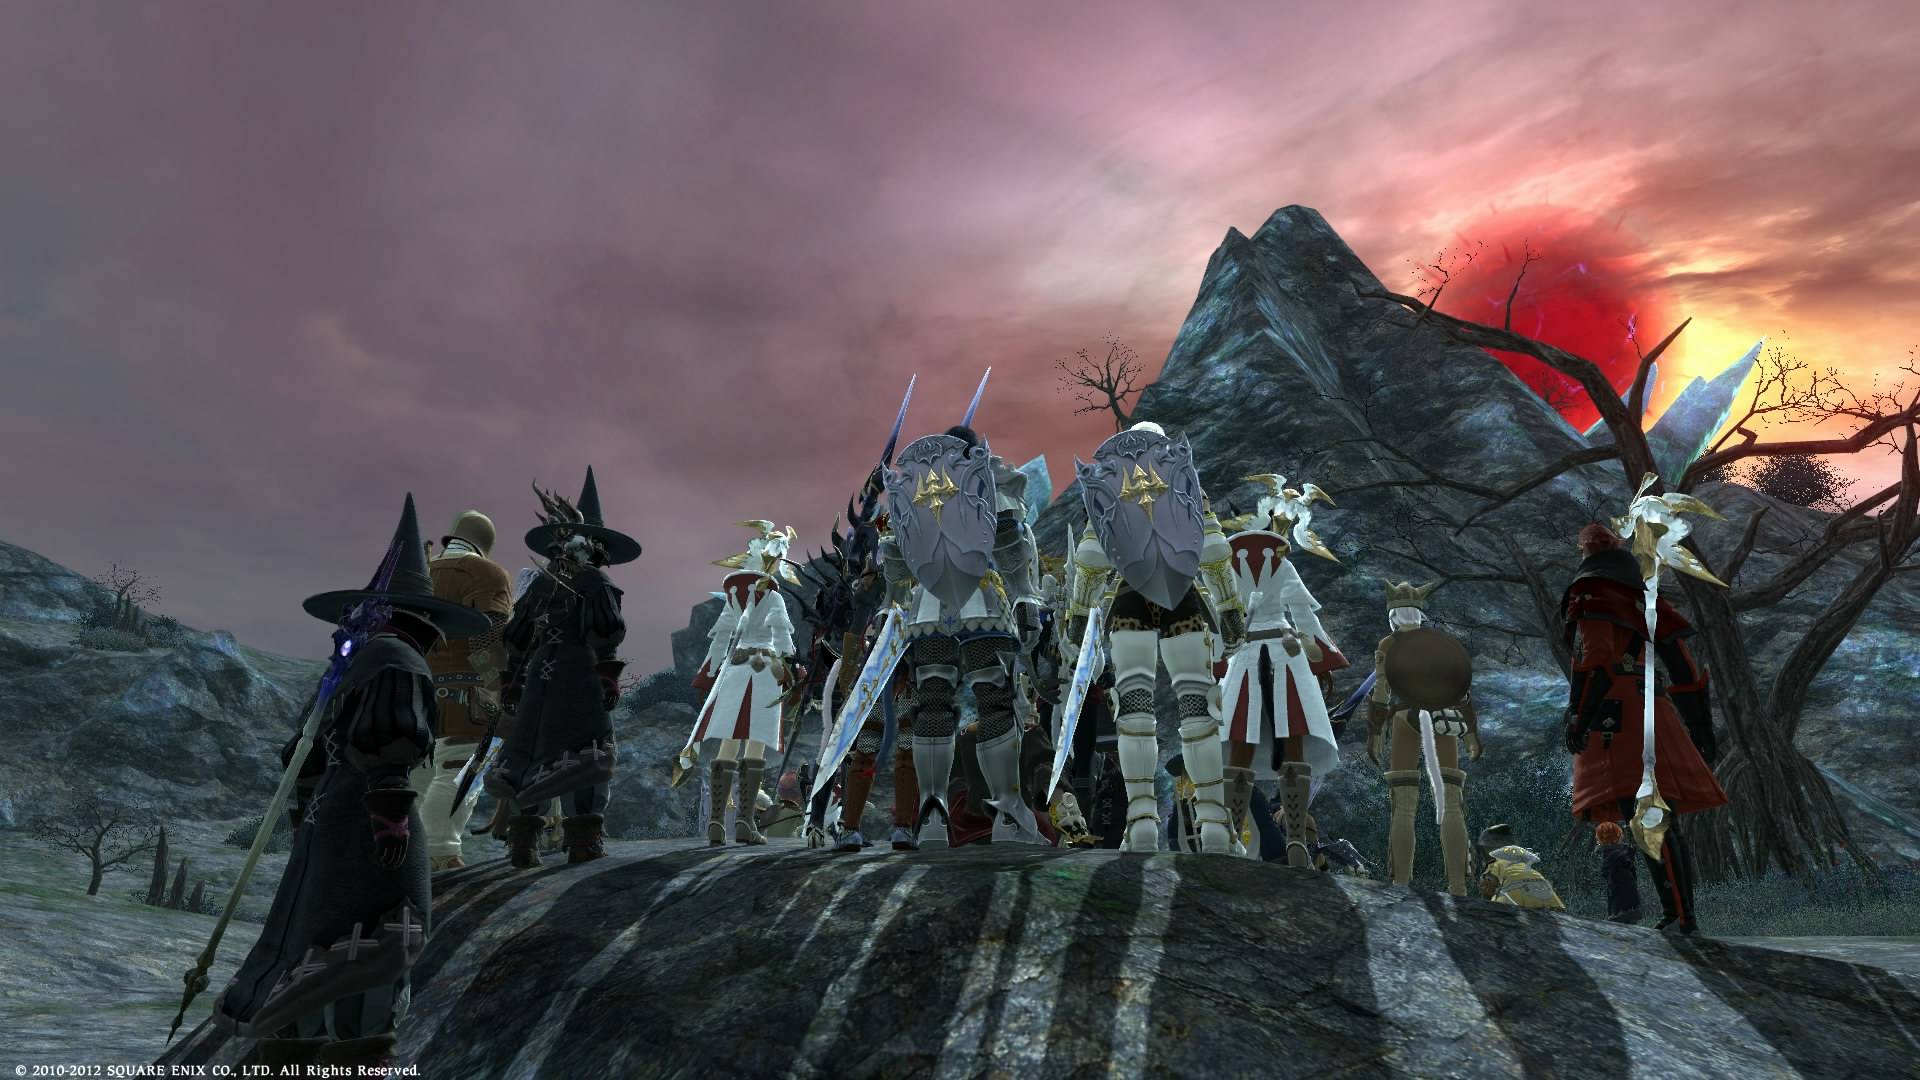 Final Fantasy XIV - The Last Day of 1.0